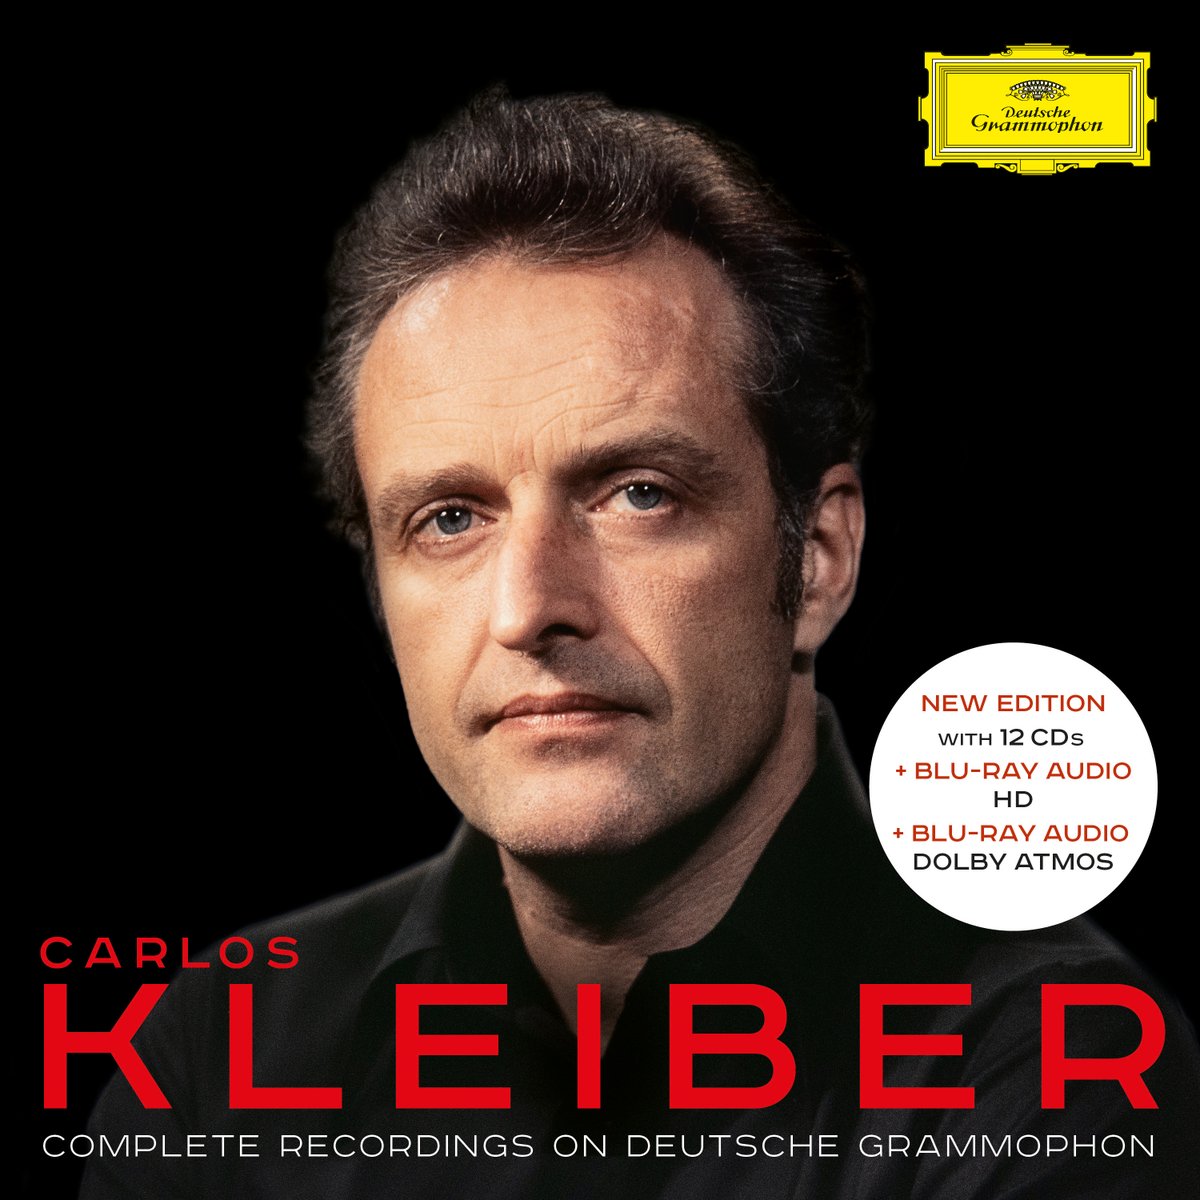 To mark the 20th anniversary of Kleiber's death this year, we have re-mastered his recordings of Traviata, “Der Freischütz” and “Tristan und Isolde” in Dolby Atmos for the first time and created a new version of our edition of his complete recordings 👉 dgt.link/kleiber-comple…